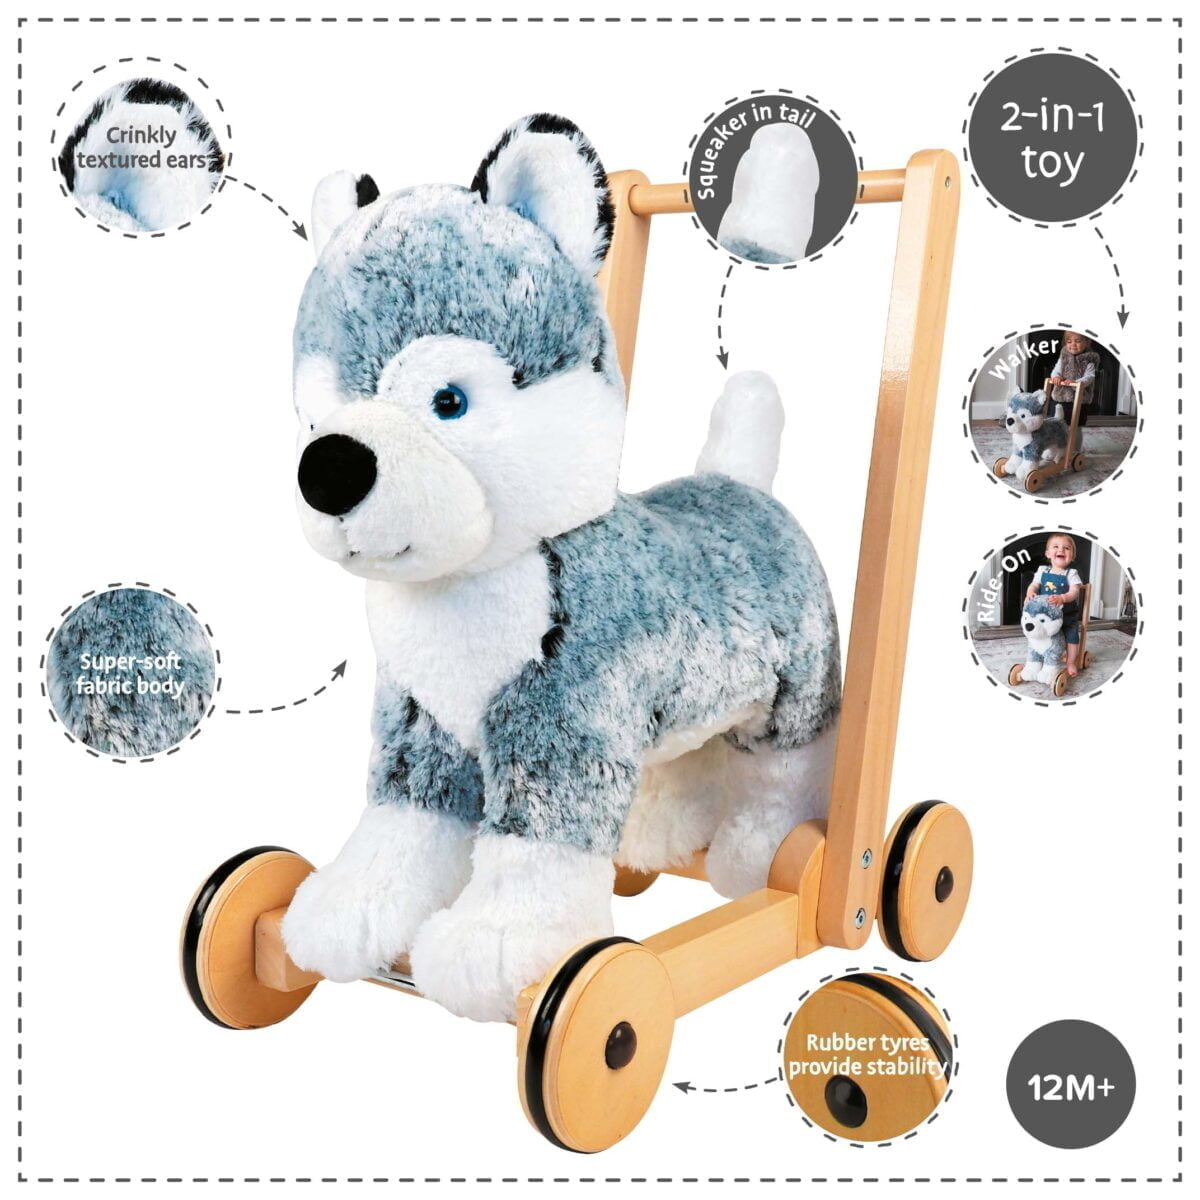 Features and benefits displayed for Mishka Dog Baby Walker